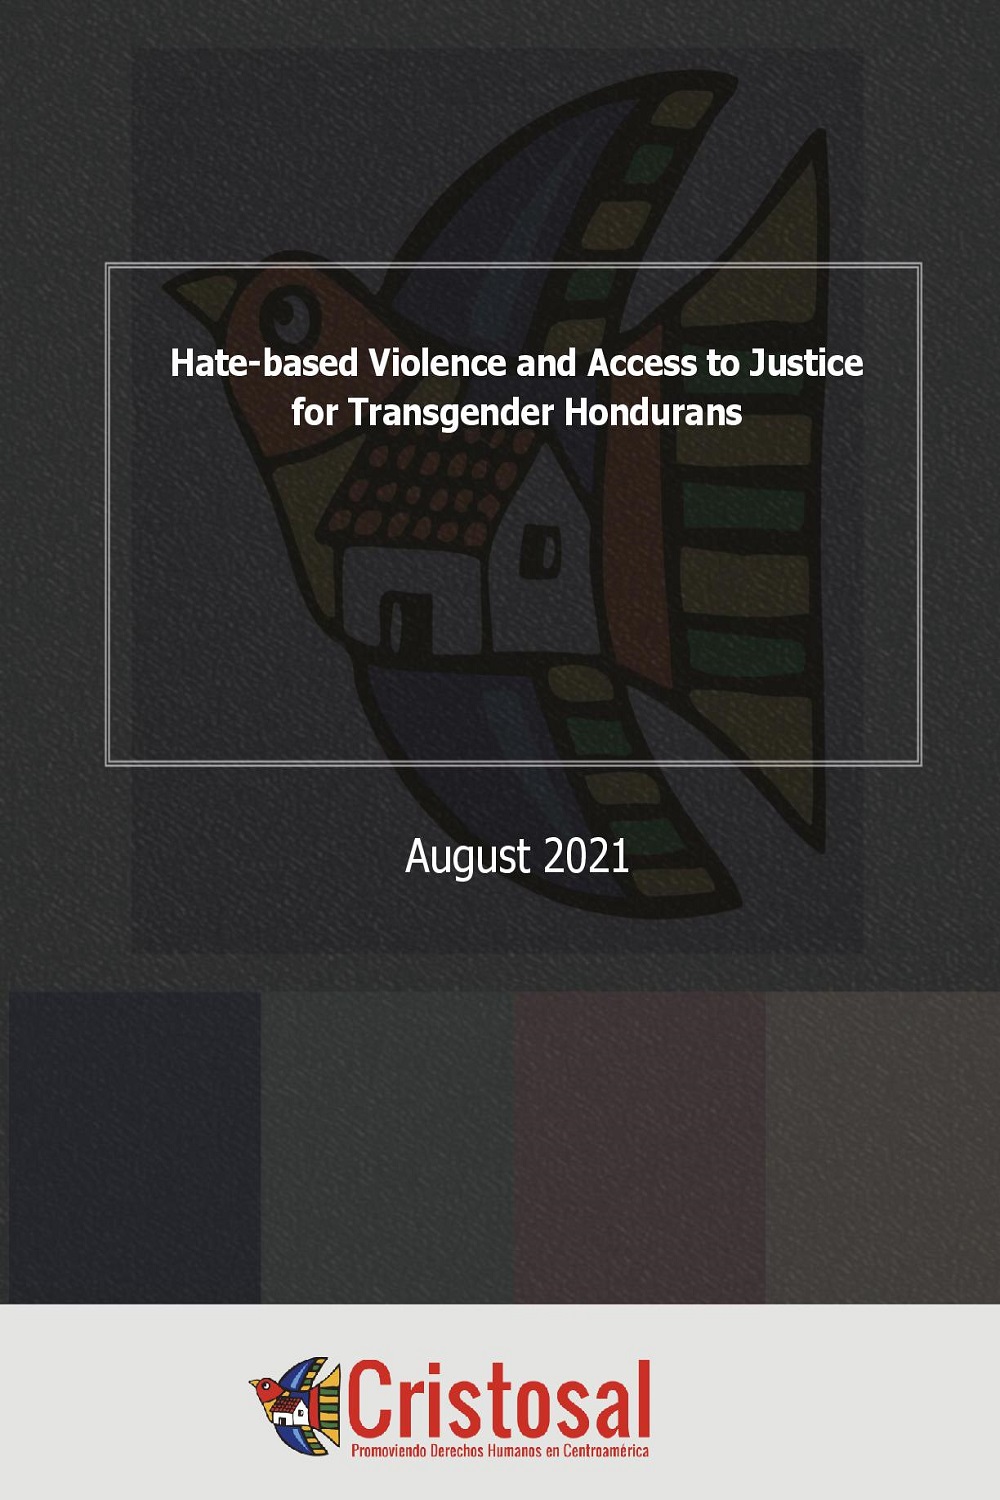 Hate-based Violence and Access to Justice for Transgender Hondurans